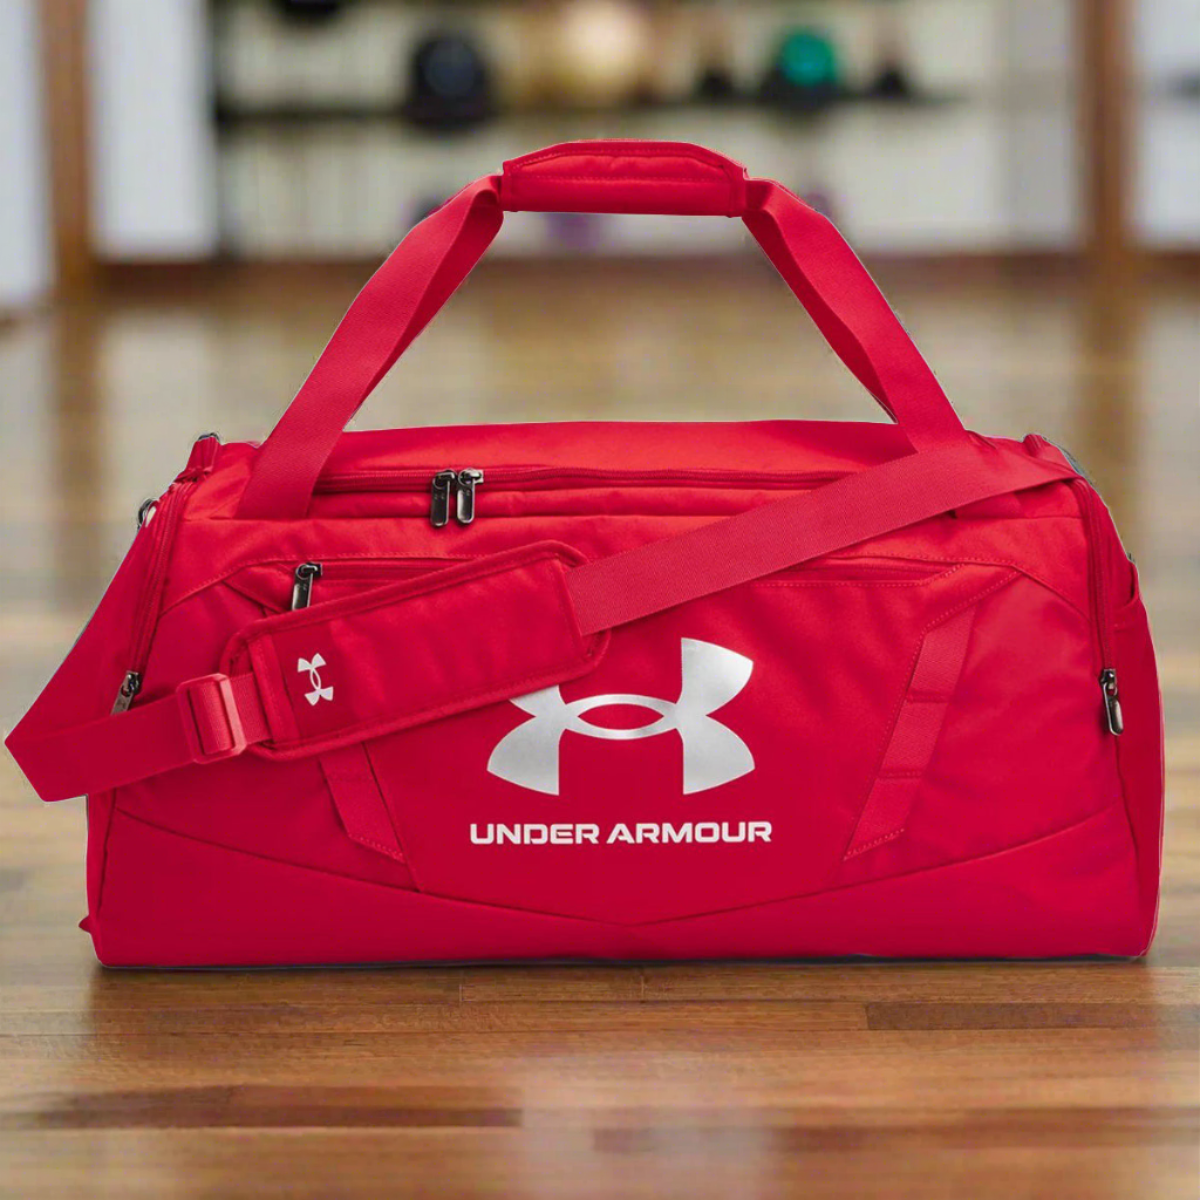 Duffel Bags - Under Armour Undeniable 5.0 MD Duffle Bag